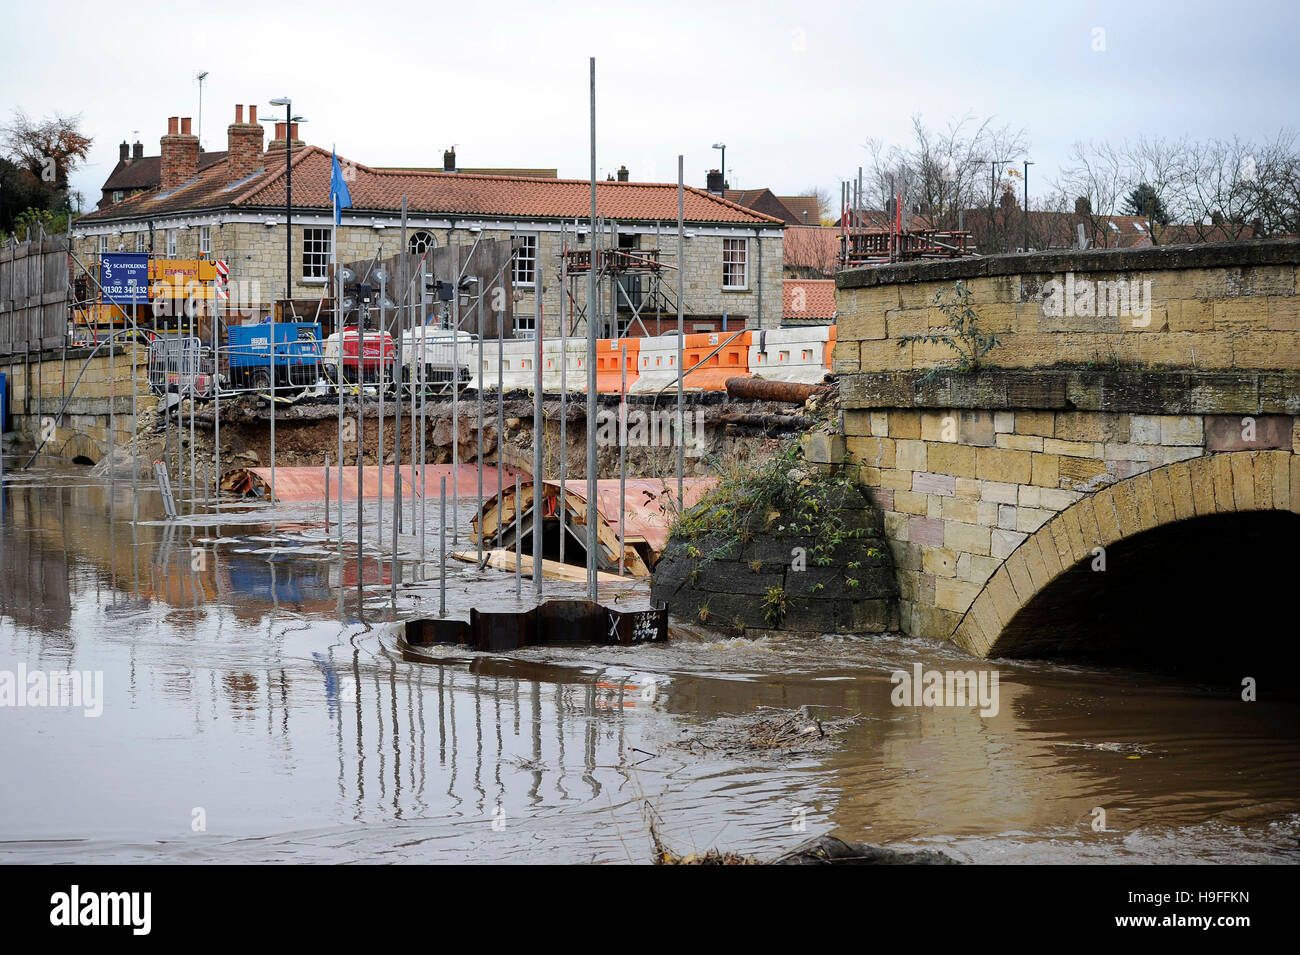 Rising floodwaters from the River Wharfe in Tadcaster stops repair work on the main section of the bridge that collapsed in last winter's floods. Stock Photo